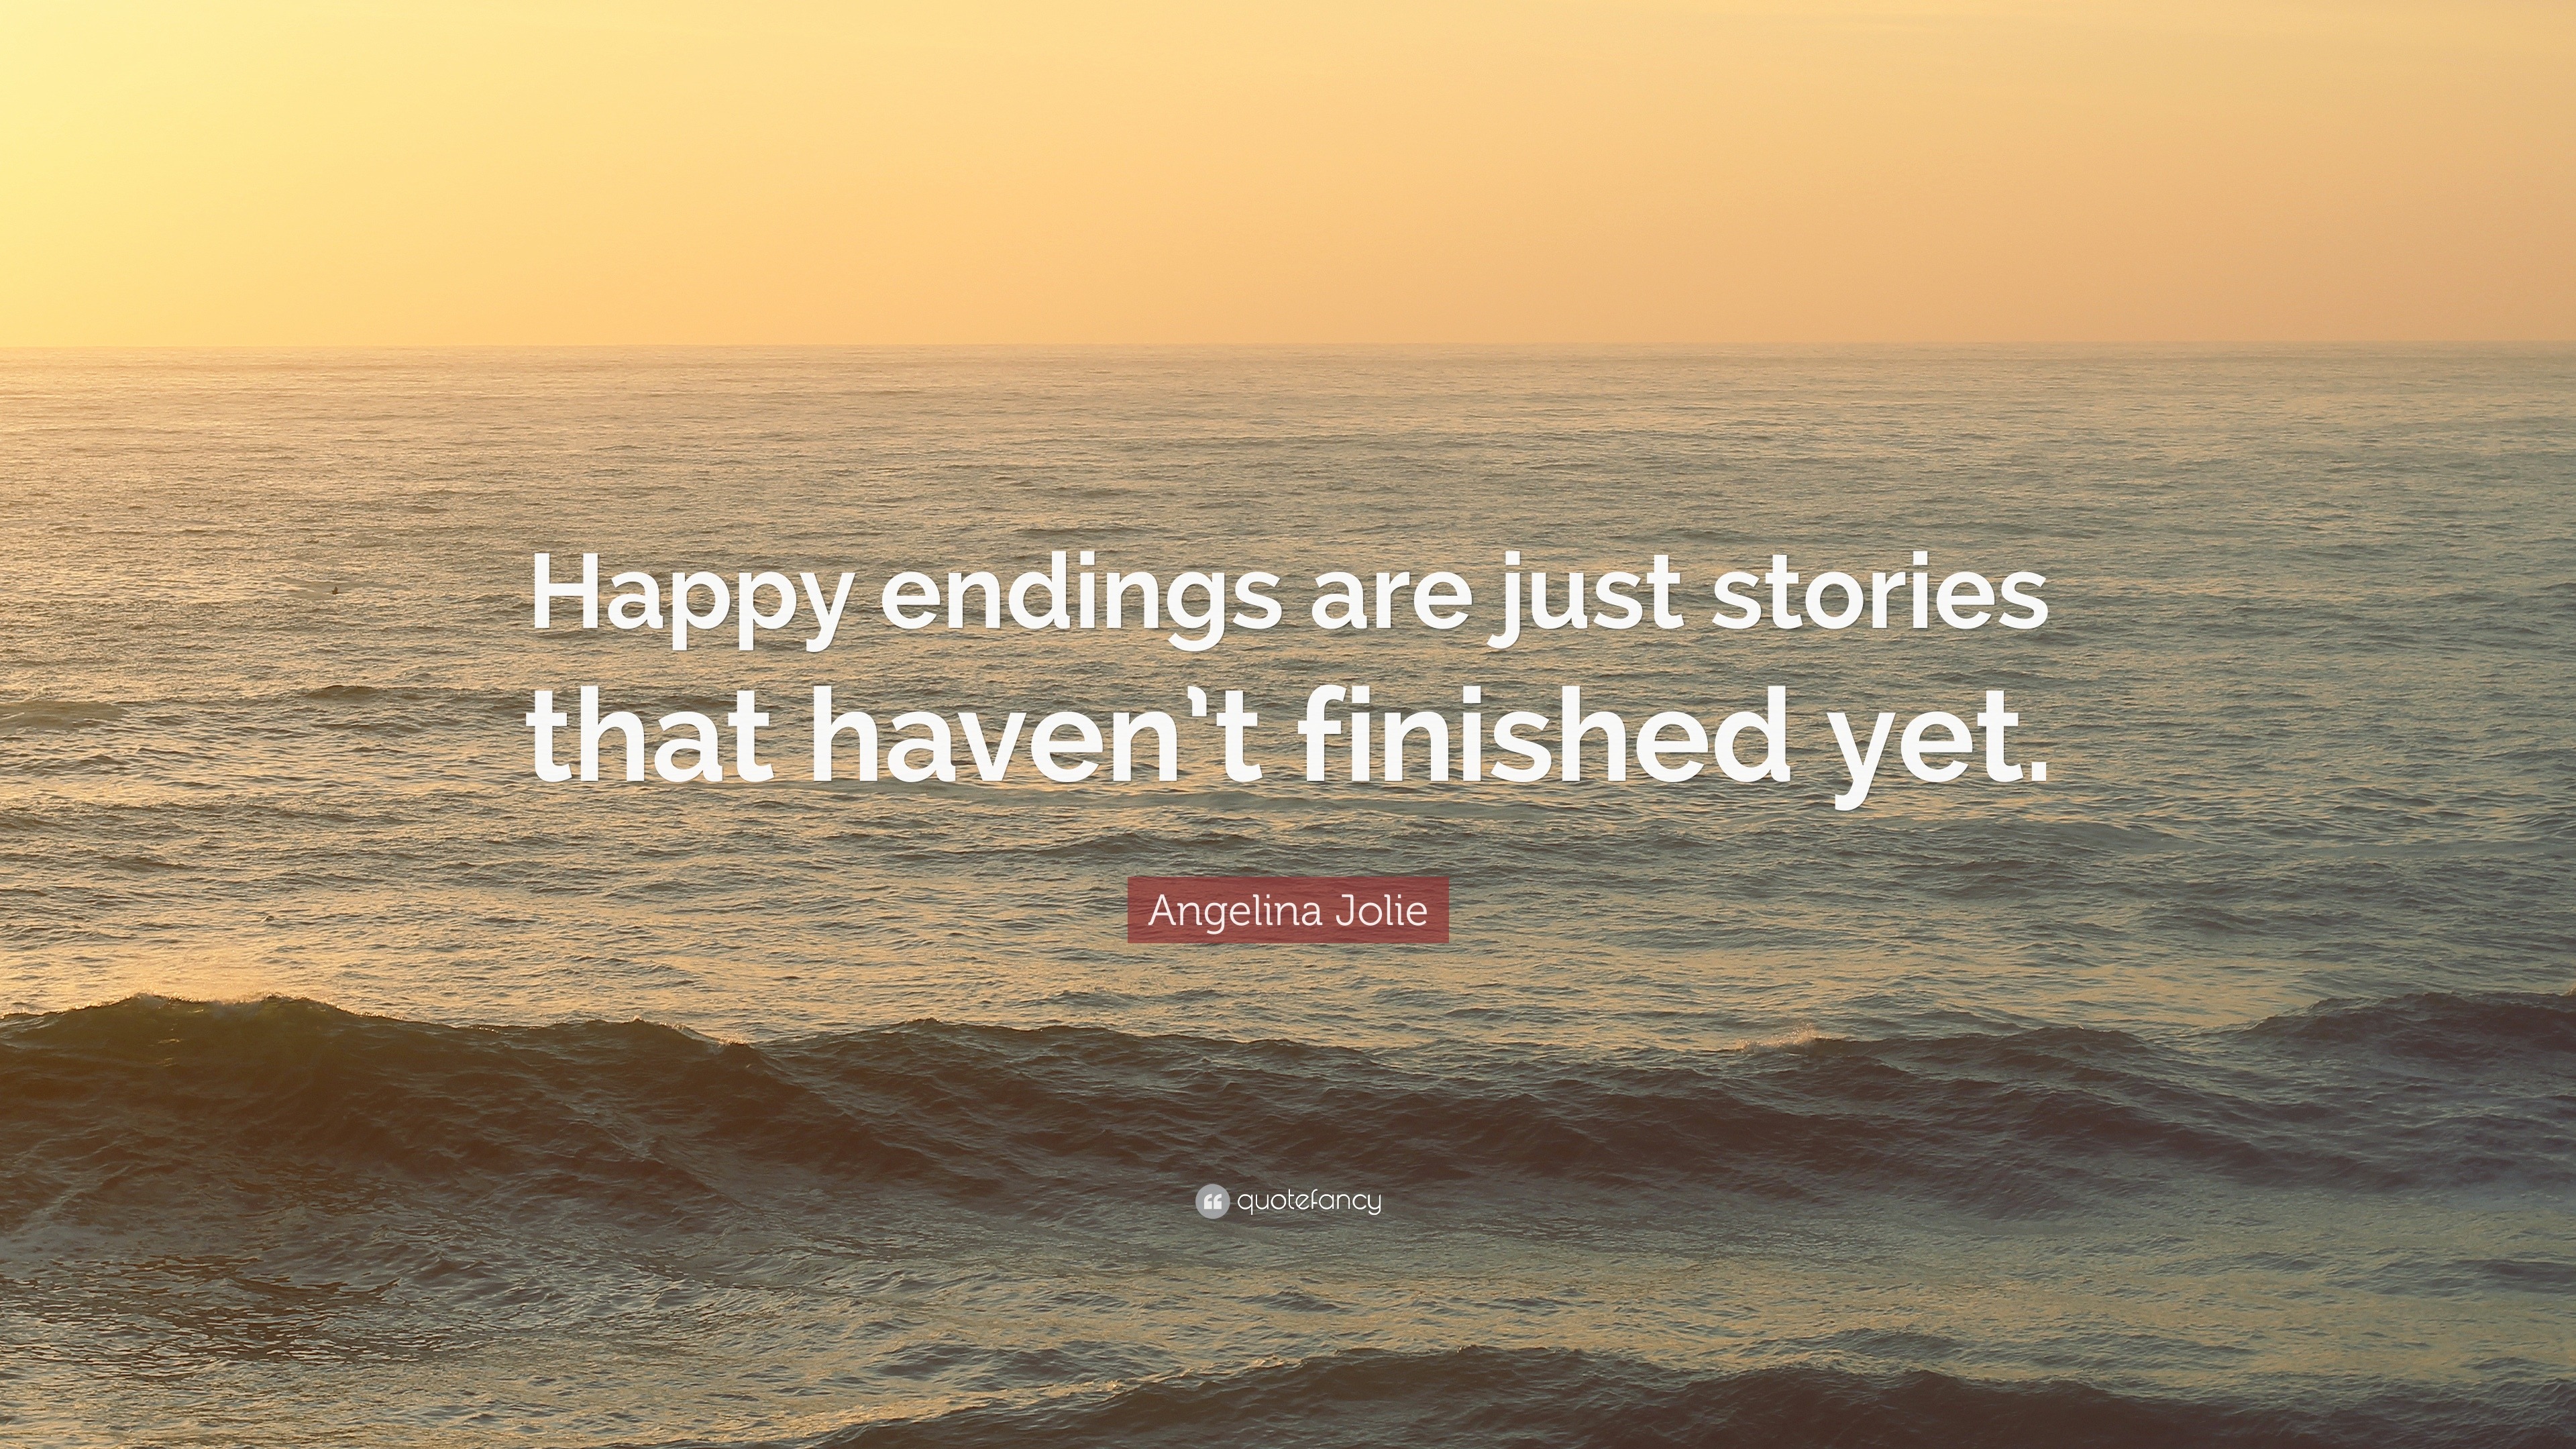 Quote About Happy Endings - Jodi Picoult Quote: "Everyone deserves a